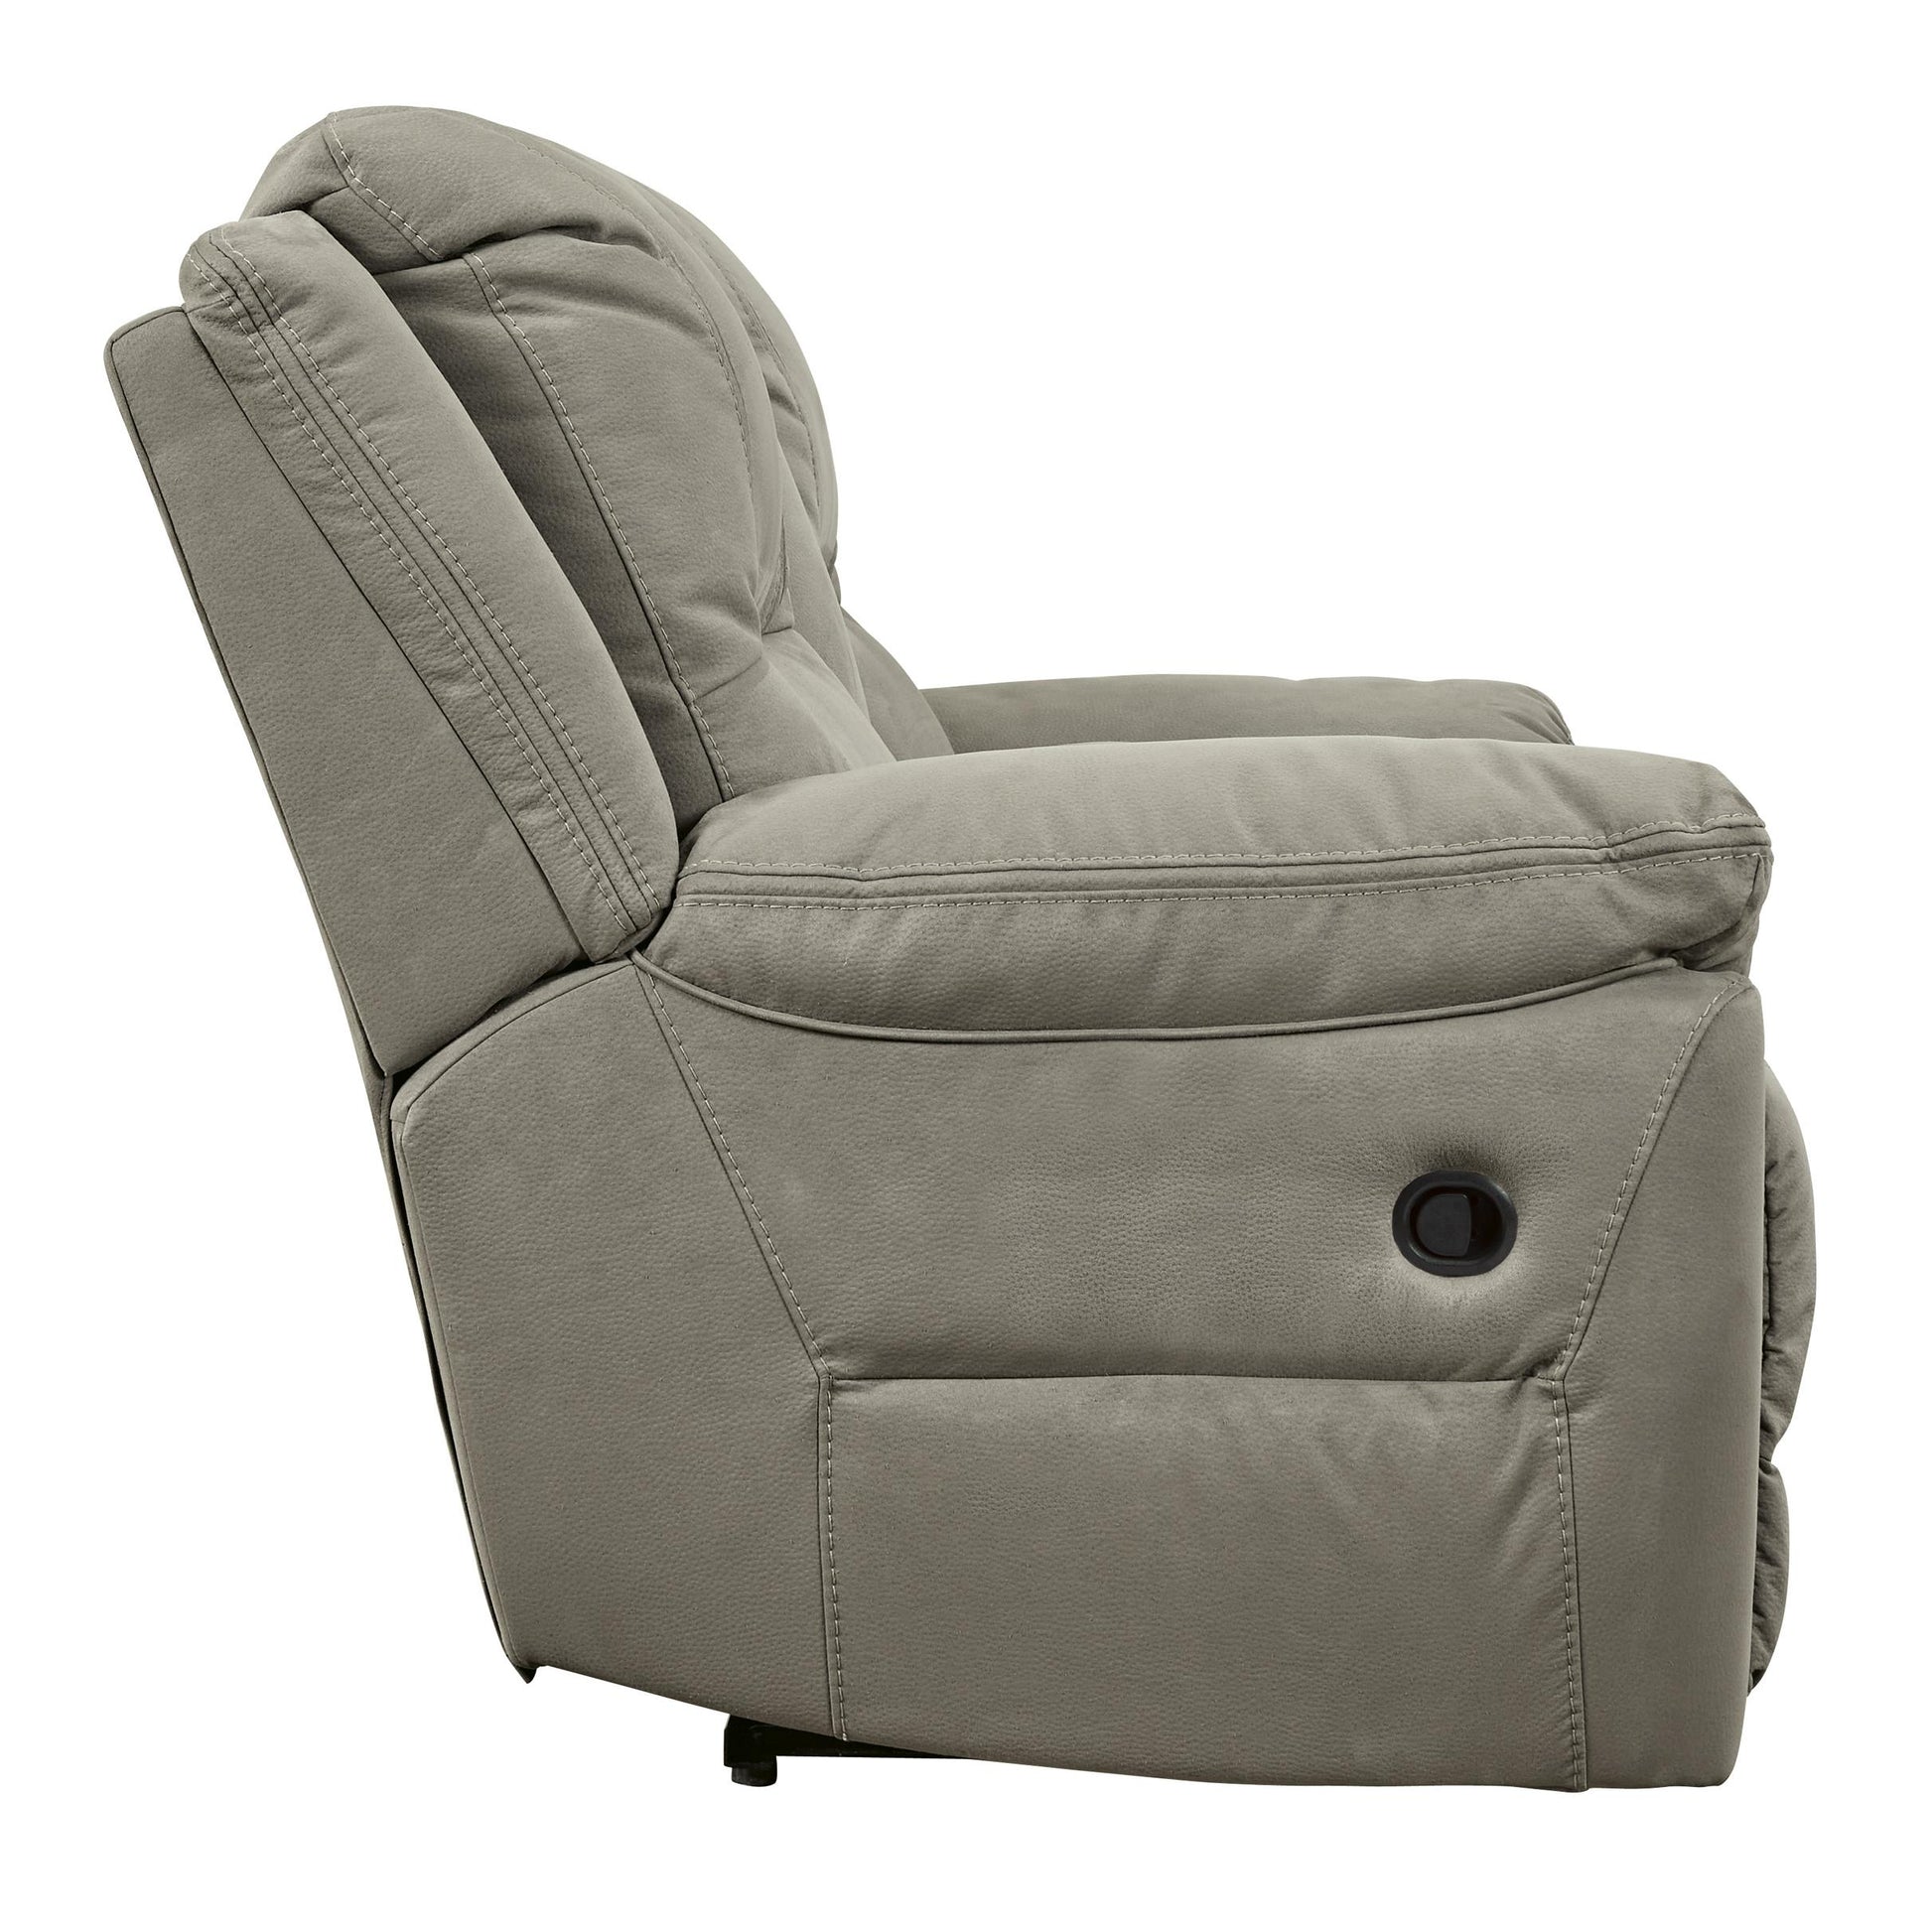 Signature Design by Ashley Next-Gen Gaucho Reclining Leather Look Loveseat 5420394 IMAGE 4